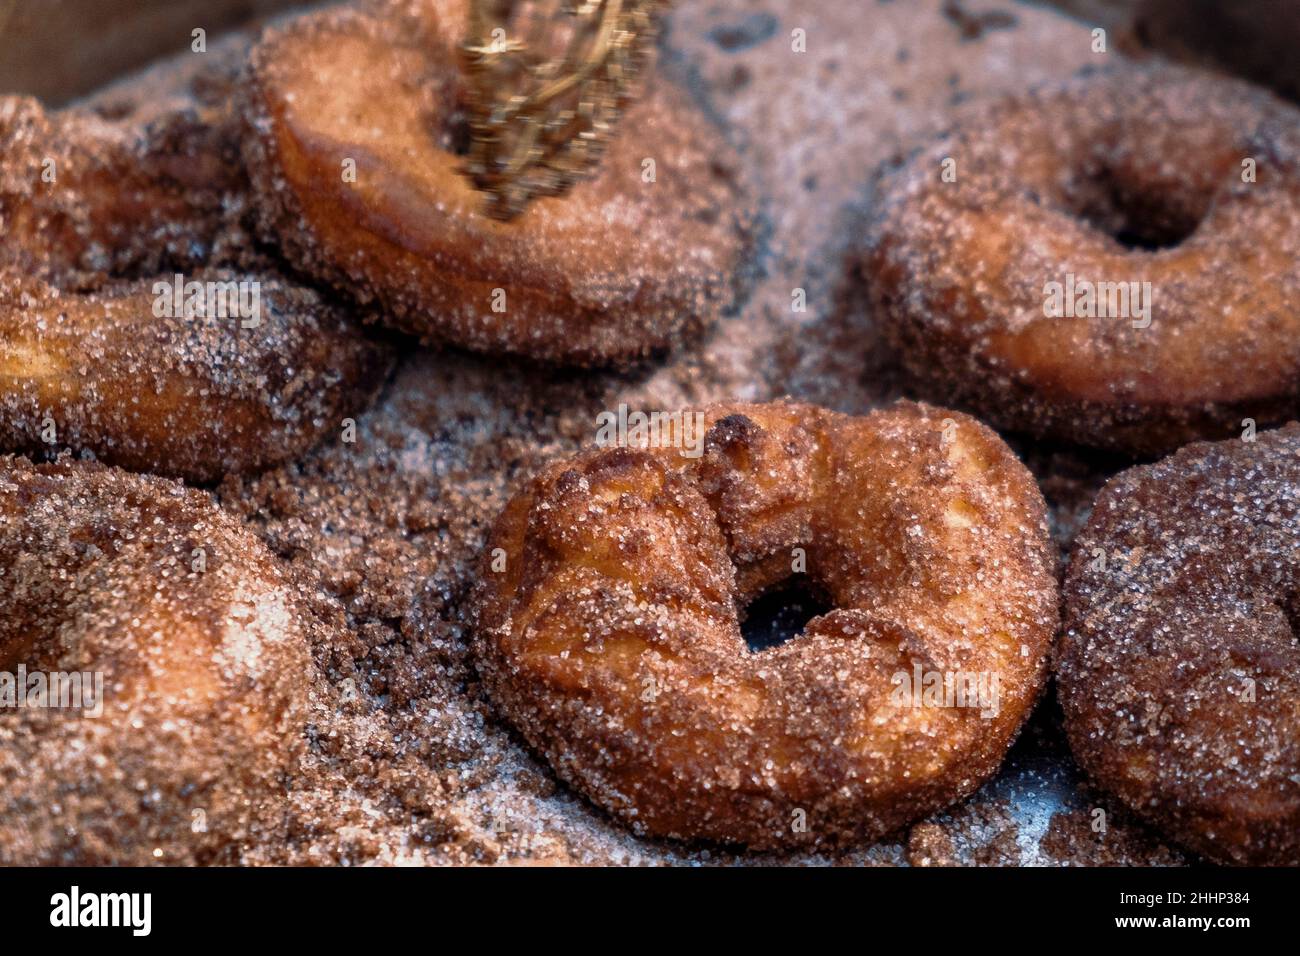 Homemade cinnamon sugar donuts in cast iron skillet outdoors. Stock Photo